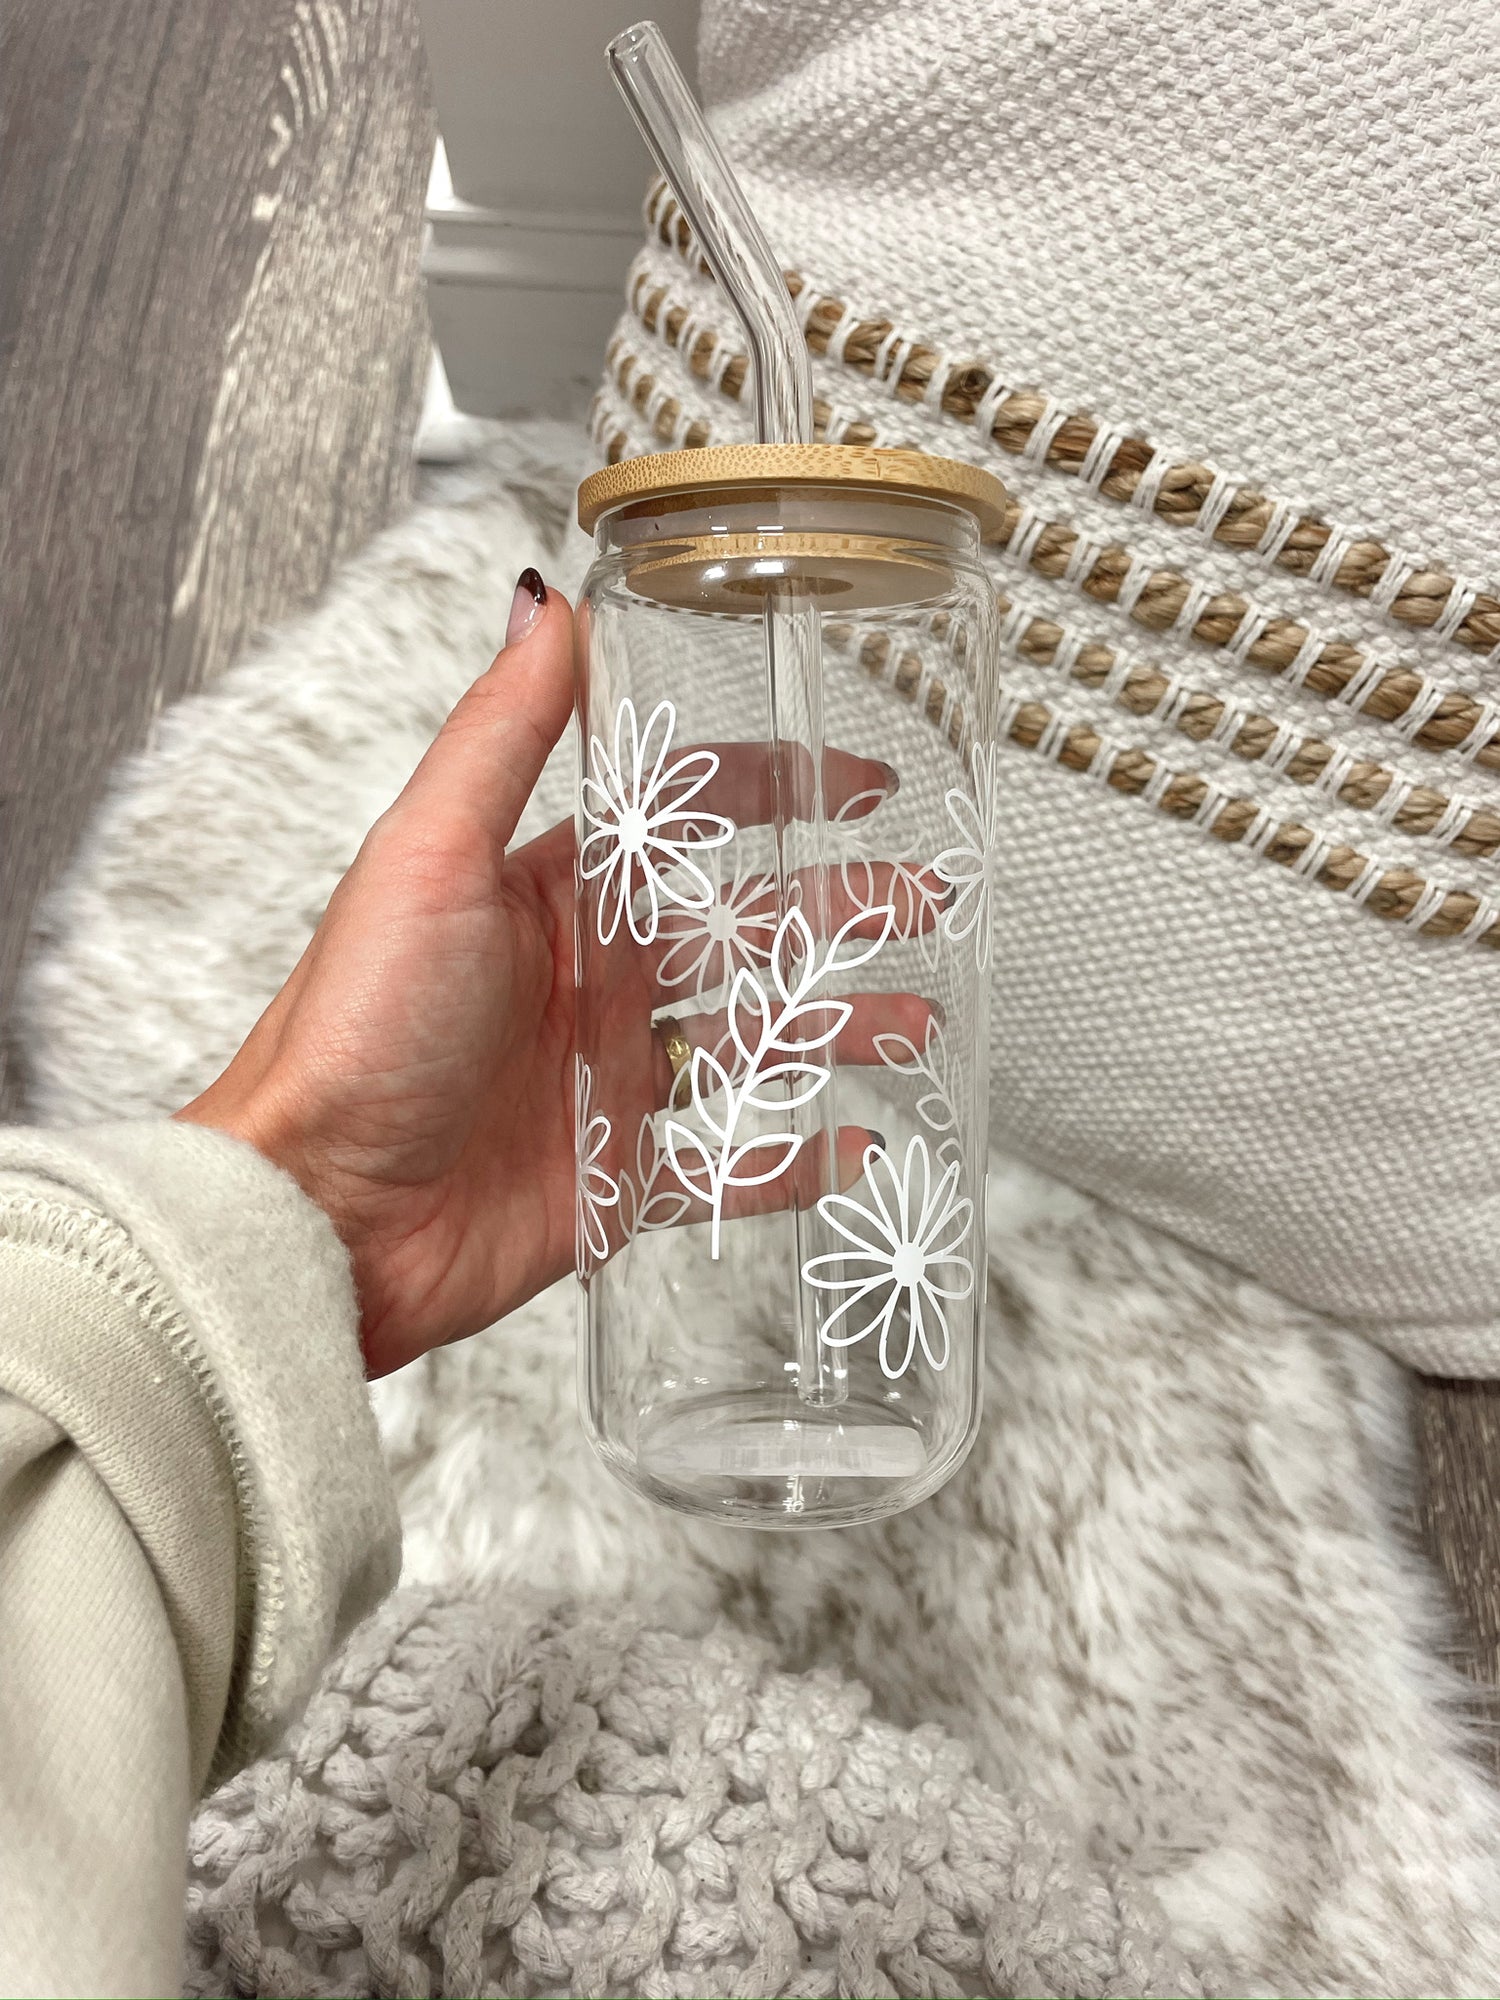 clear class cup with straw with white floral design